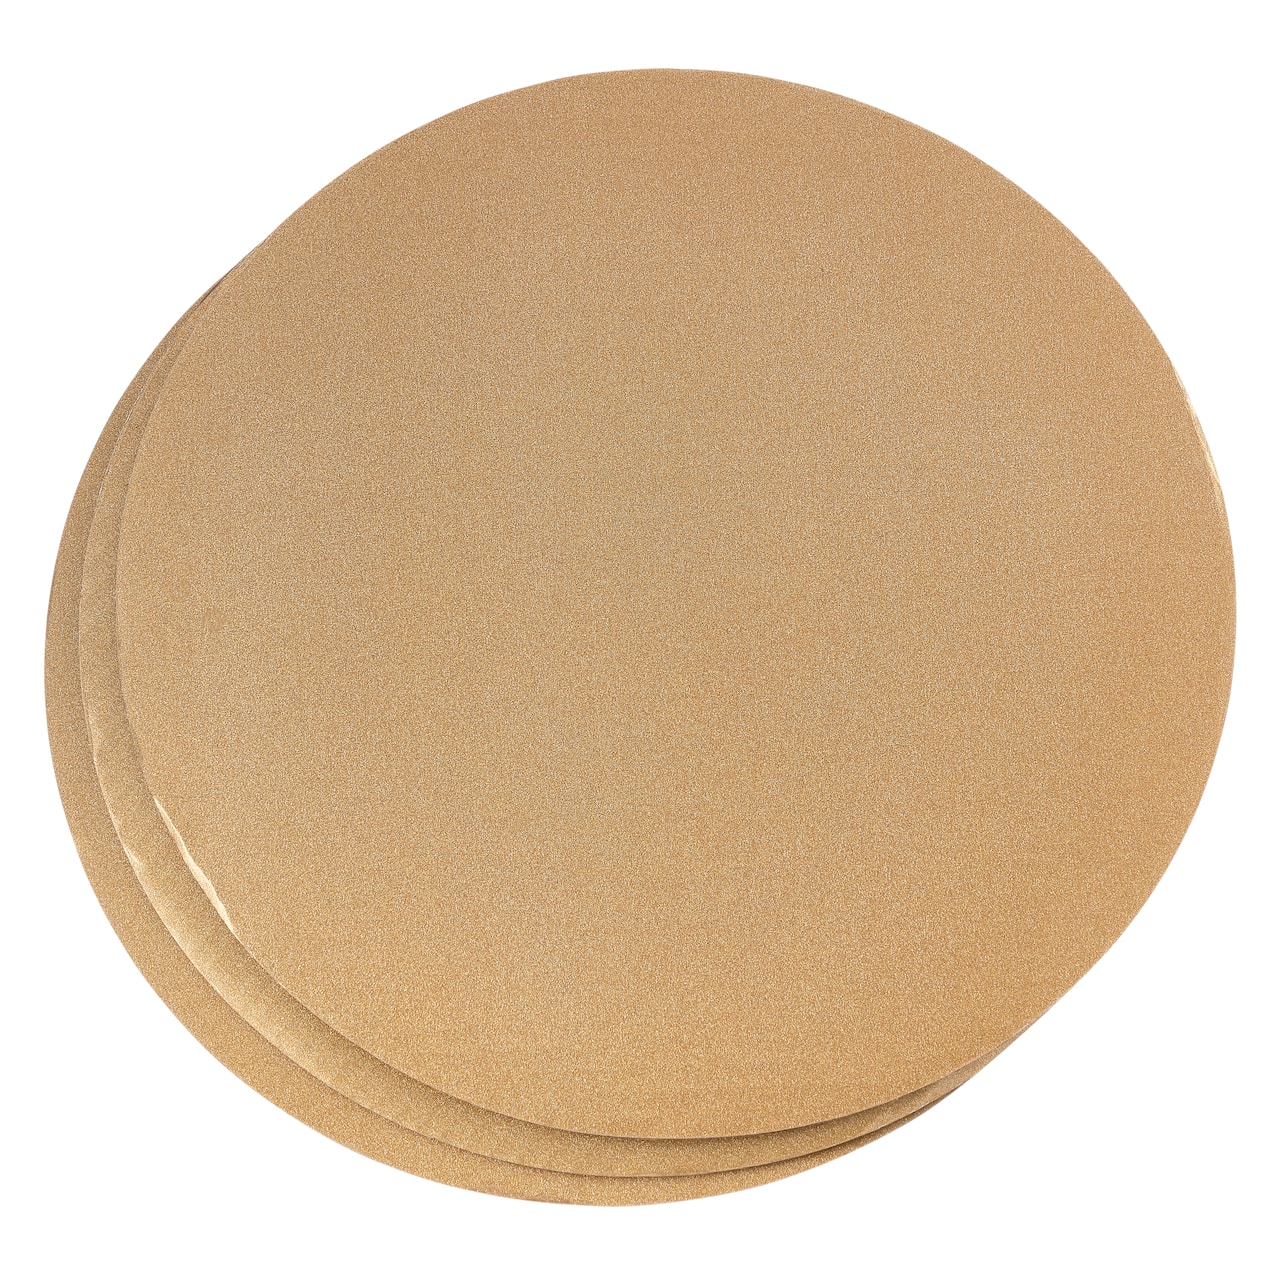 6 Packs: 3 ct. (18 total) 12&#x22; Gold Glitter Round Cake Boards by Celebrate It&#x2122;